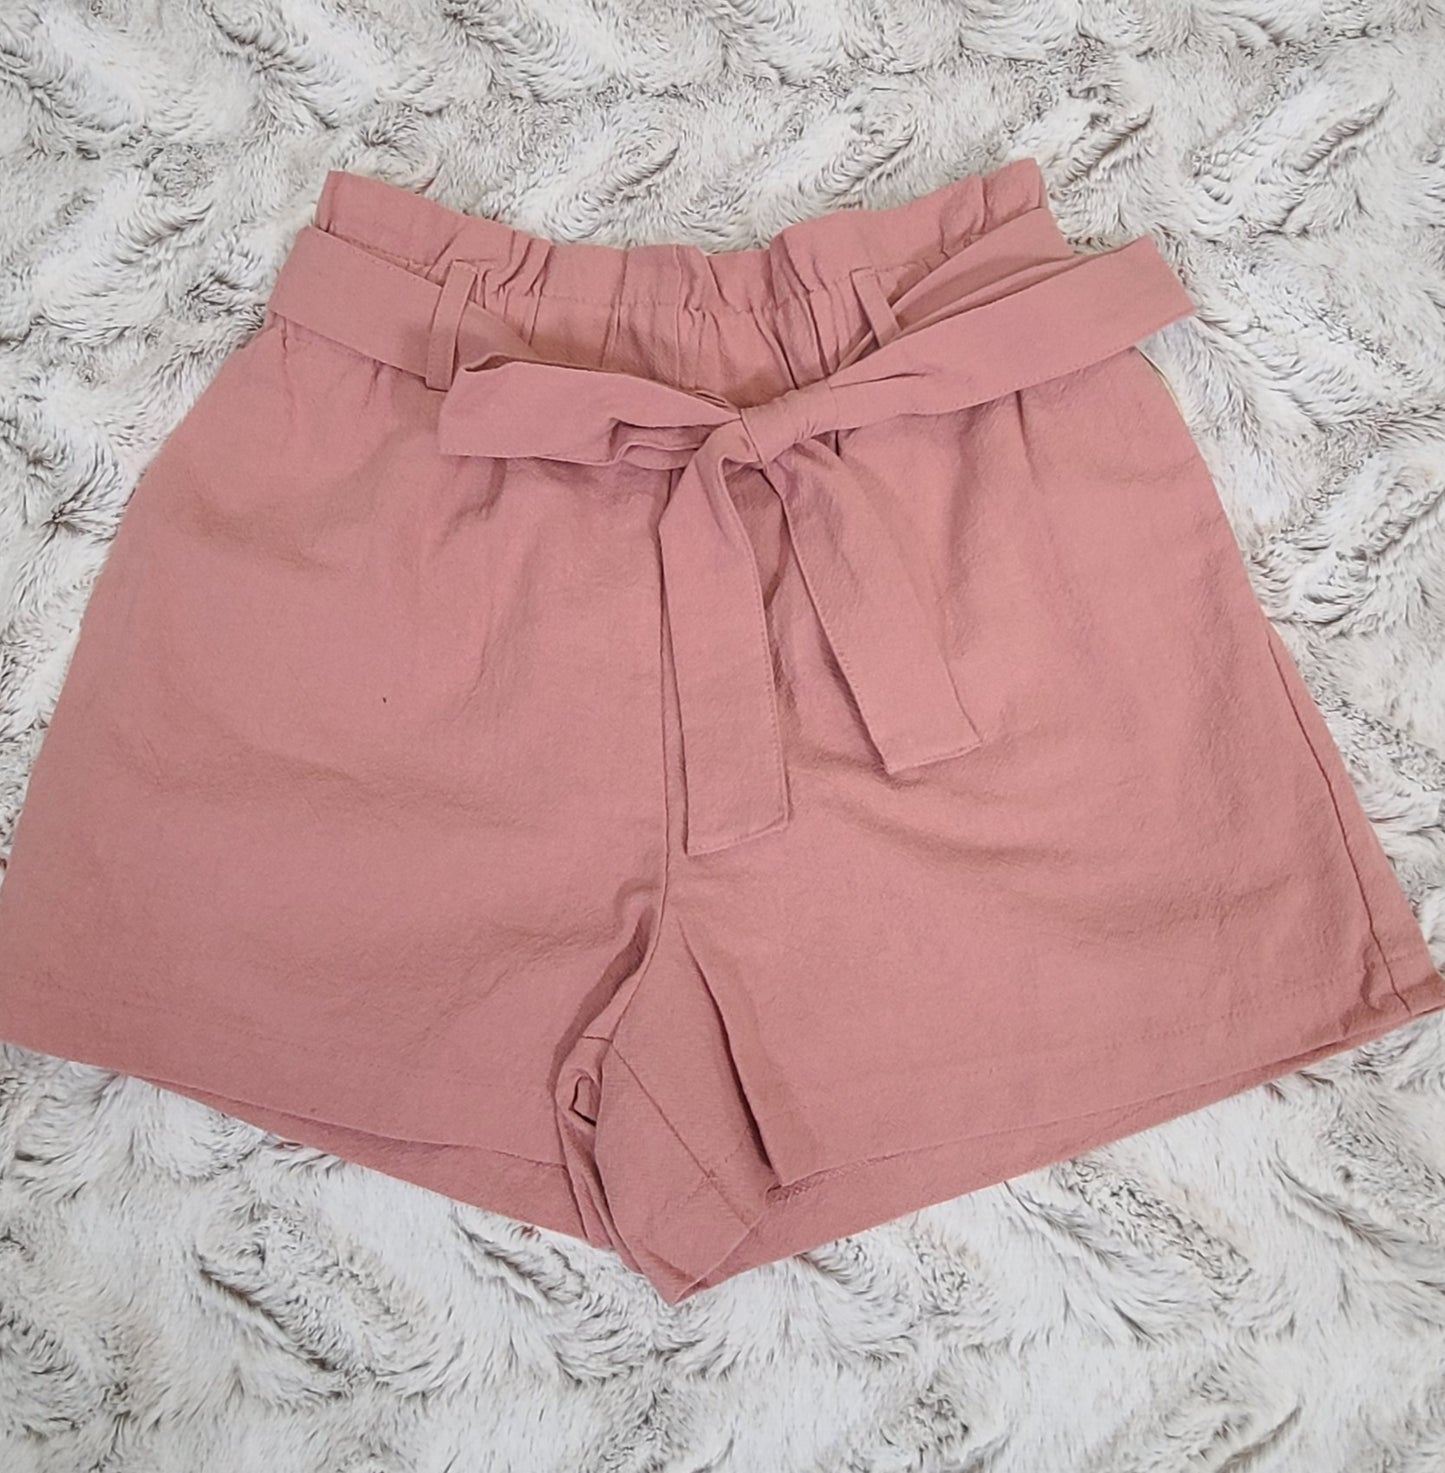 Mulberry Shorts w/ Front Tie - Last one Left*